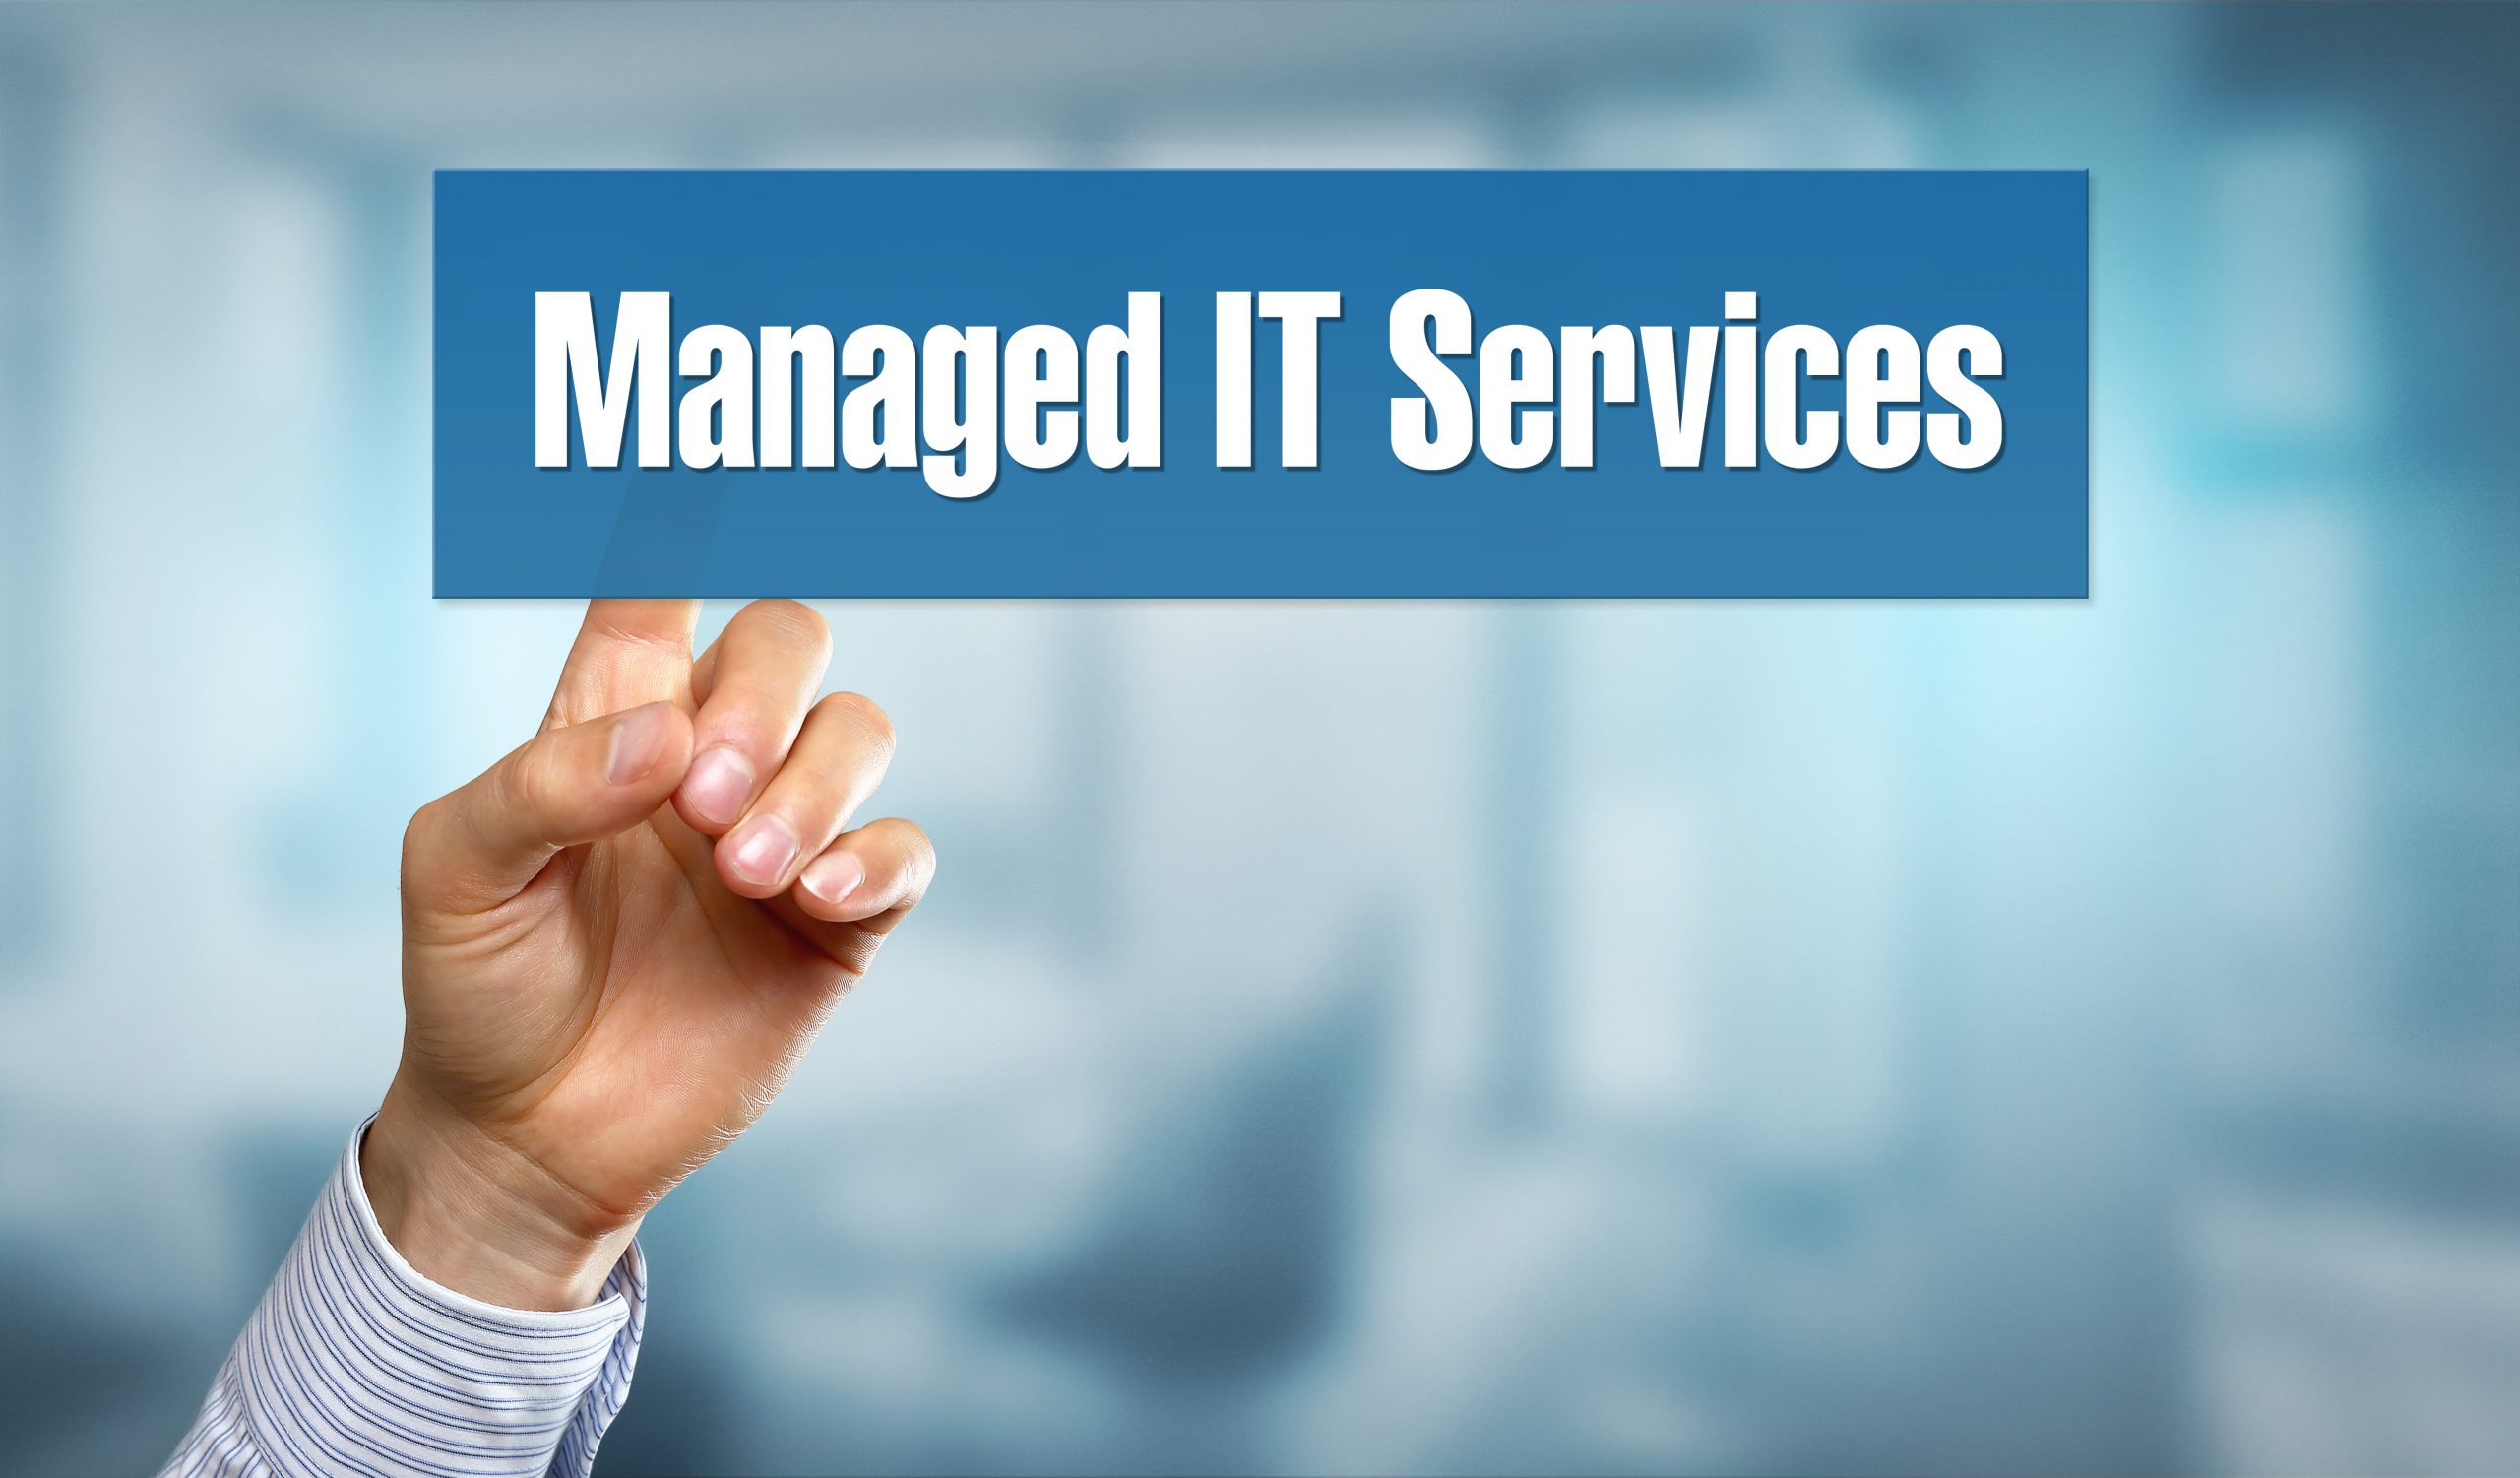 5 Ways To Market Your Managed IT Services